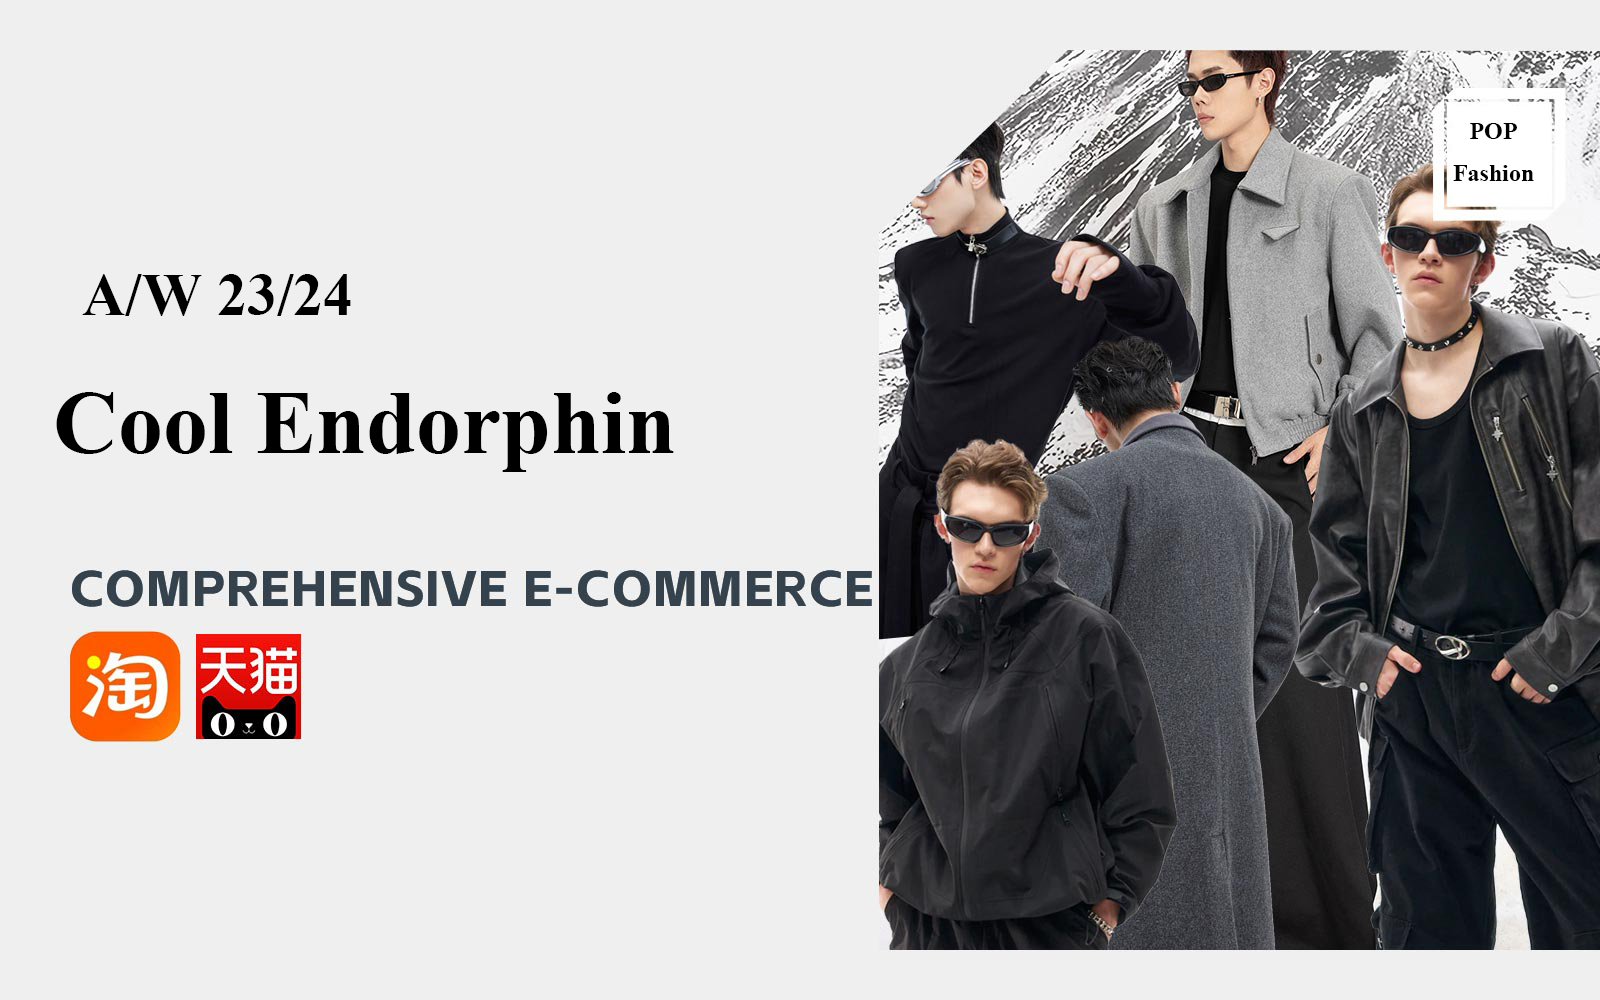 Cold Endorphins -- The Comprehensive Analysis of Menswear E-Commerce Brand